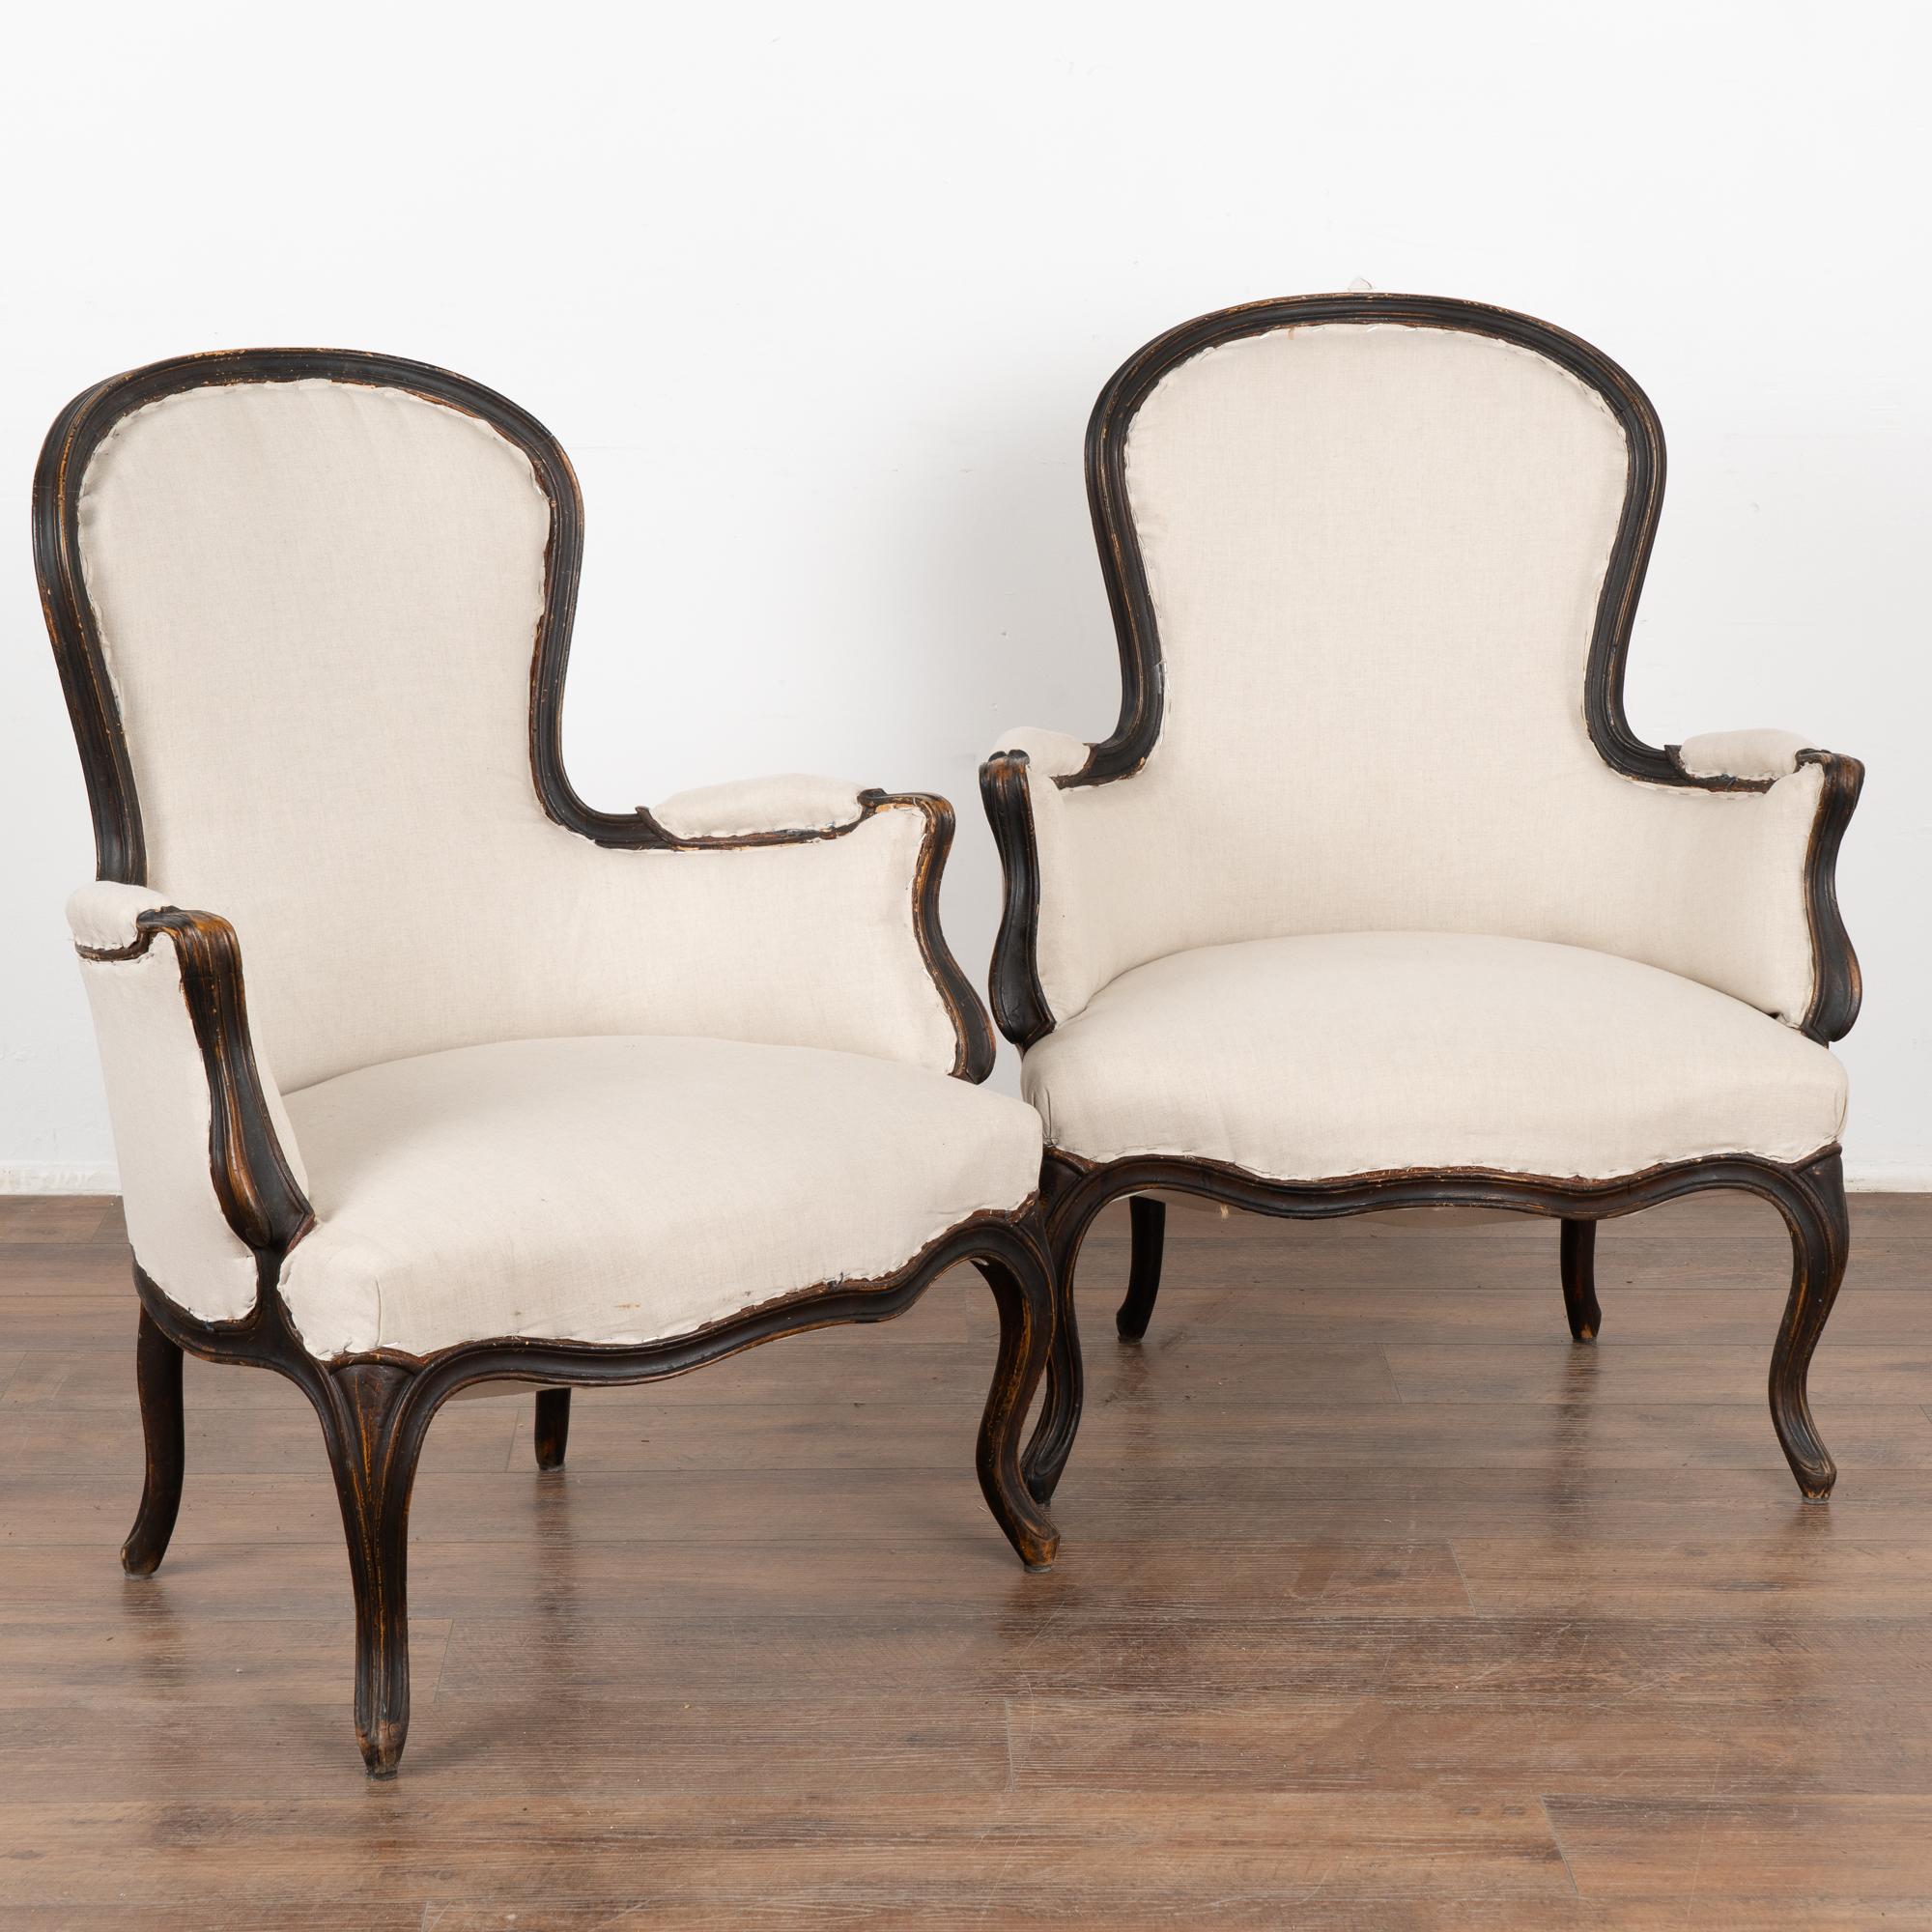 Pair, attractive Swedish country Gustavian arm chairs with gently curved back and arms, cabriolet legs.
Newer, professionally applied layered black painted finish has been lightly distressed and rubbed, adding to the grace of these lovely arm